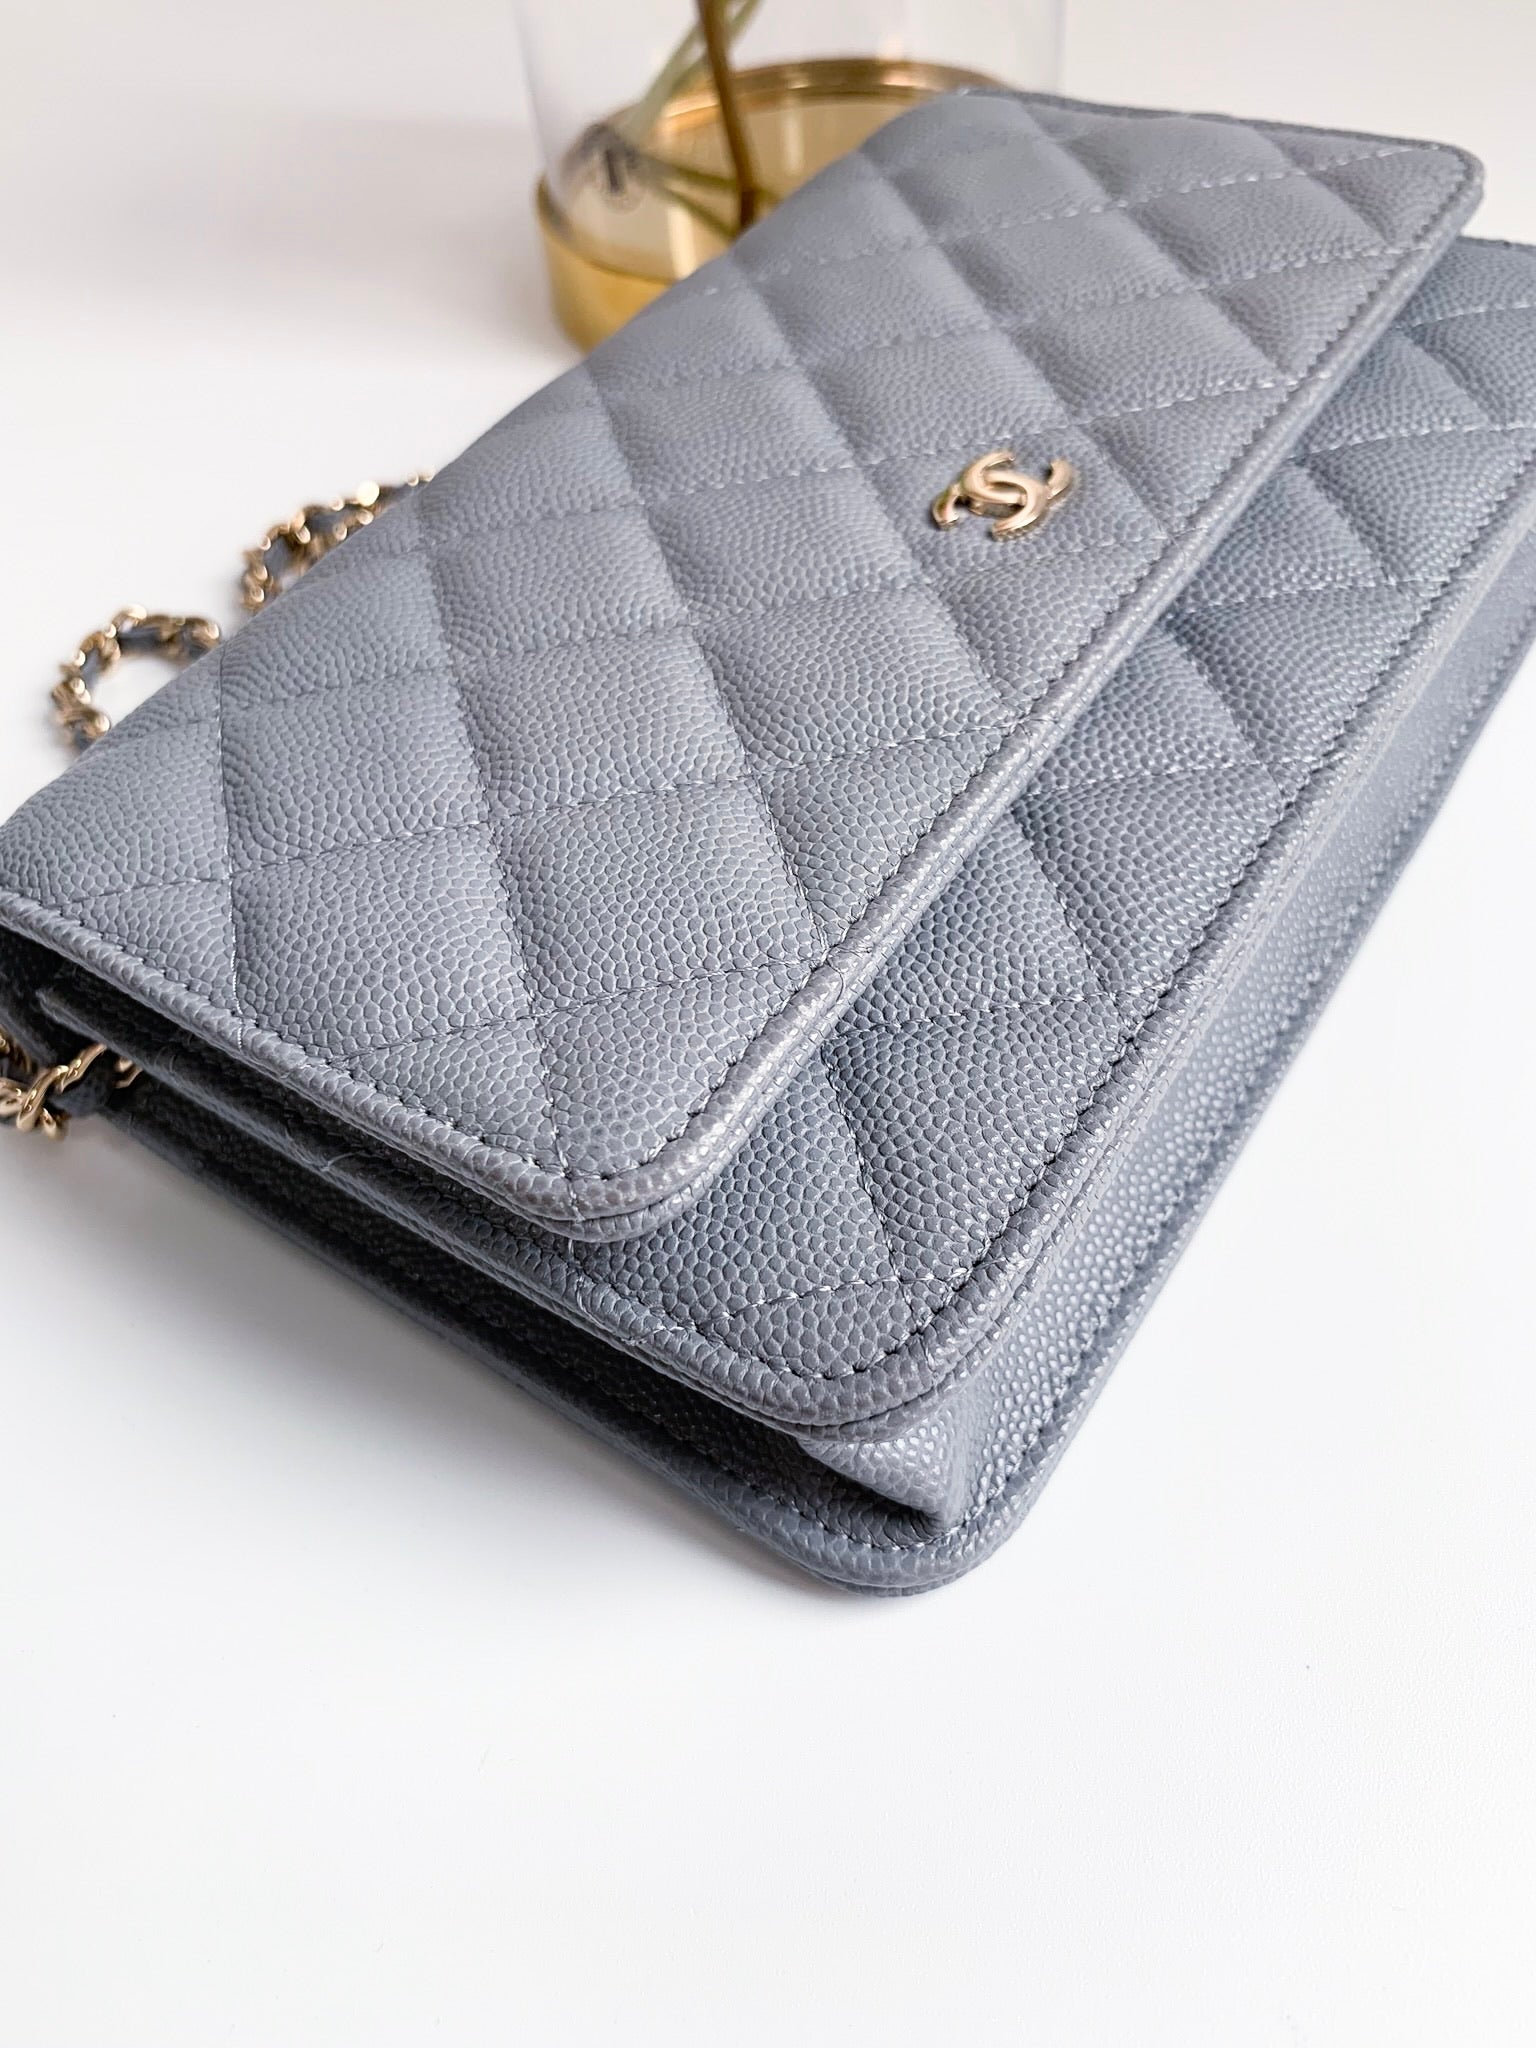 Chanel Classic Quilted Caviar Wallet on Chain